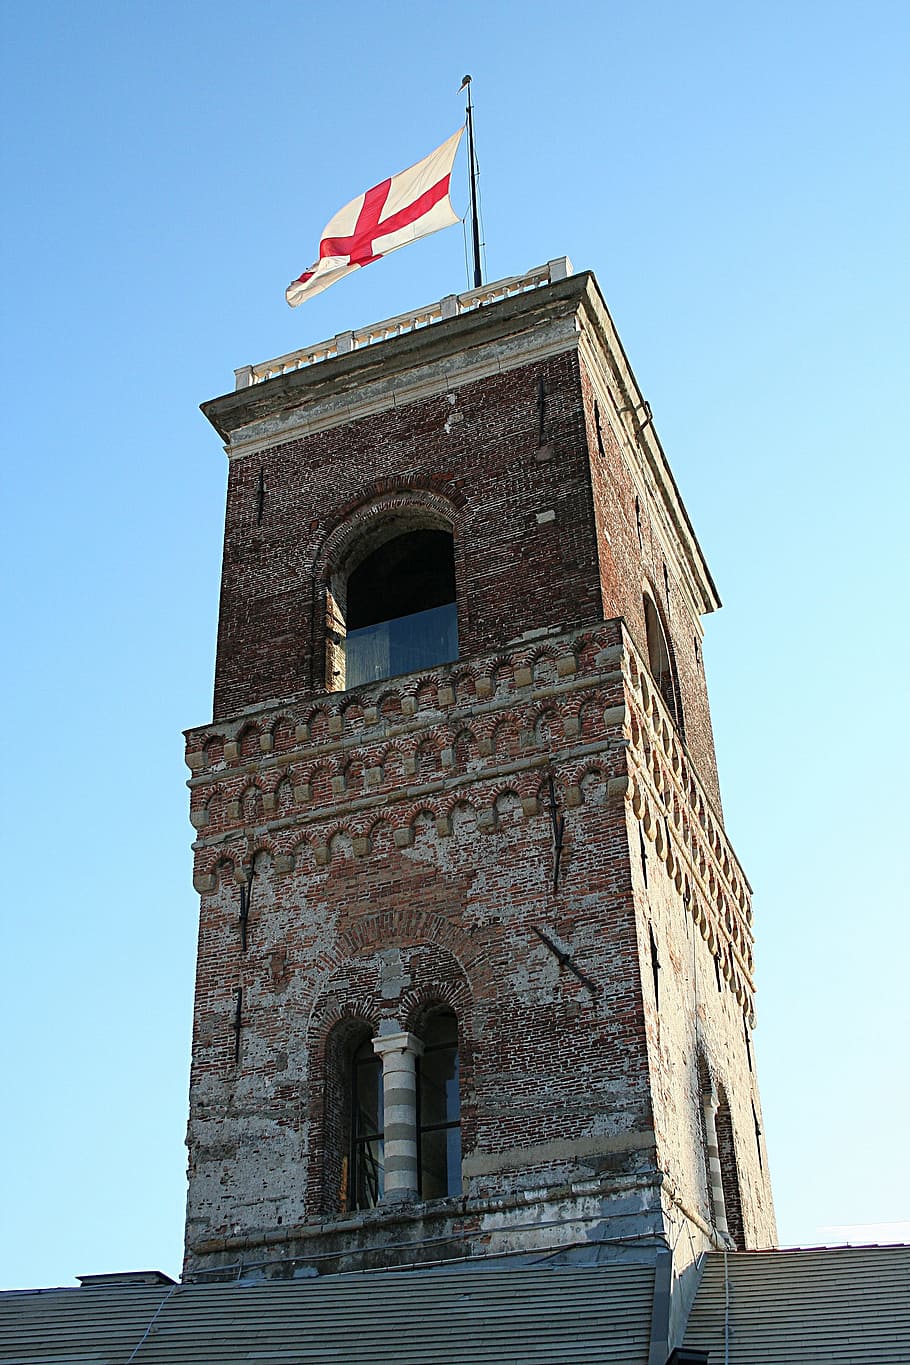 genoa, palazzo ducale, torre, prison, historical centre, italy, city, flag, built structure, architecture